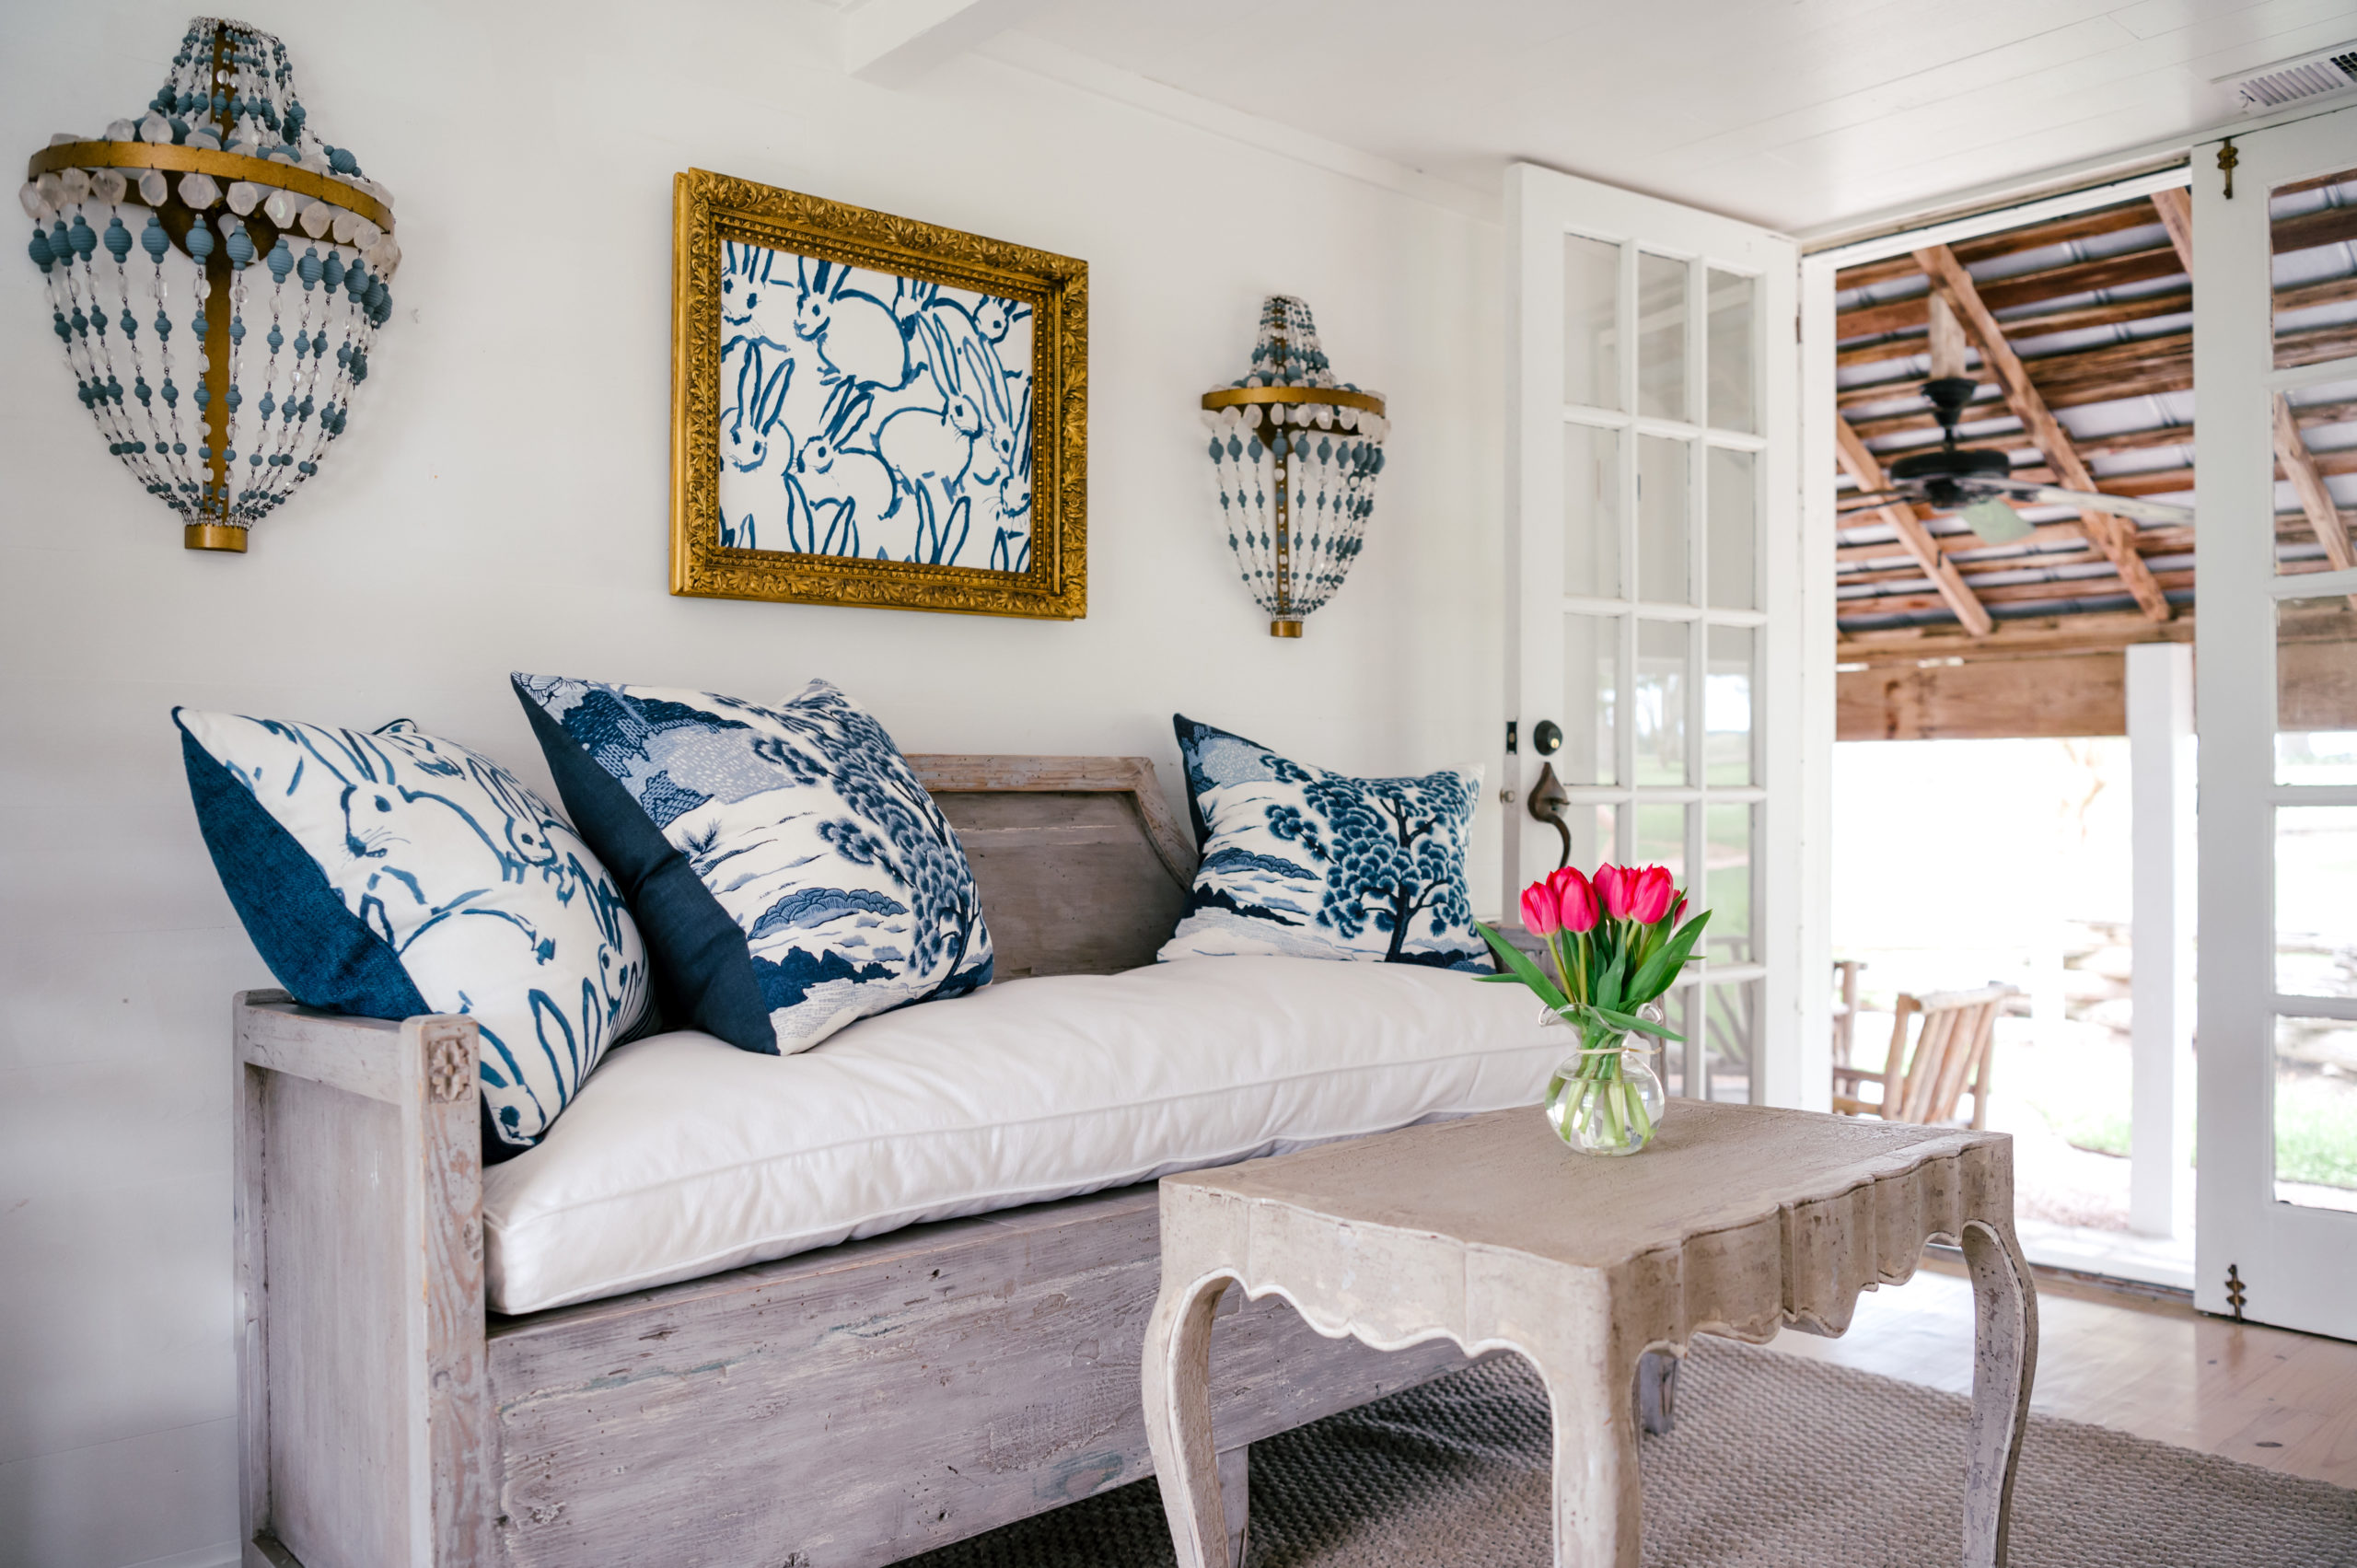 Interior Photography of wooden couch and white and blue cushions in a room with a frame of blue bunnies and beautiful chandler lamps and a grey table with pink flowers on the table